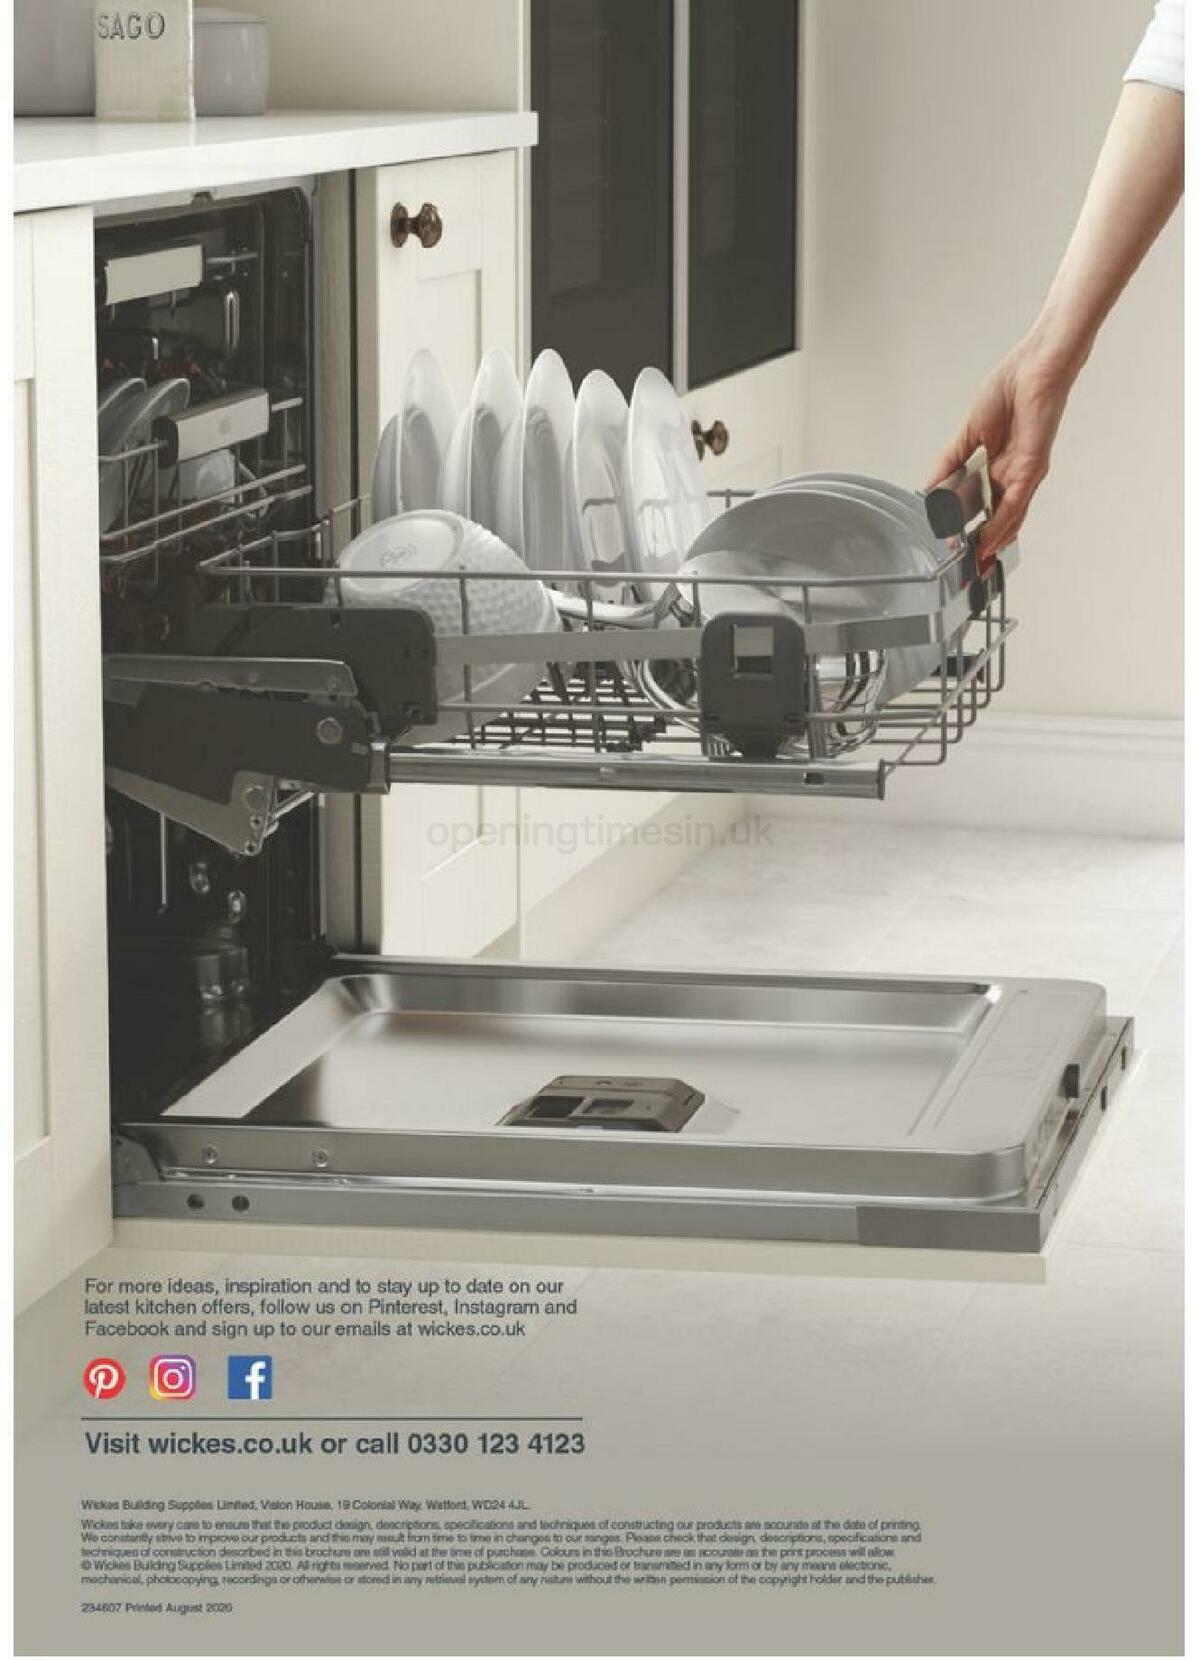 Wickes Kitchen appliances brochure Offers from 1 September